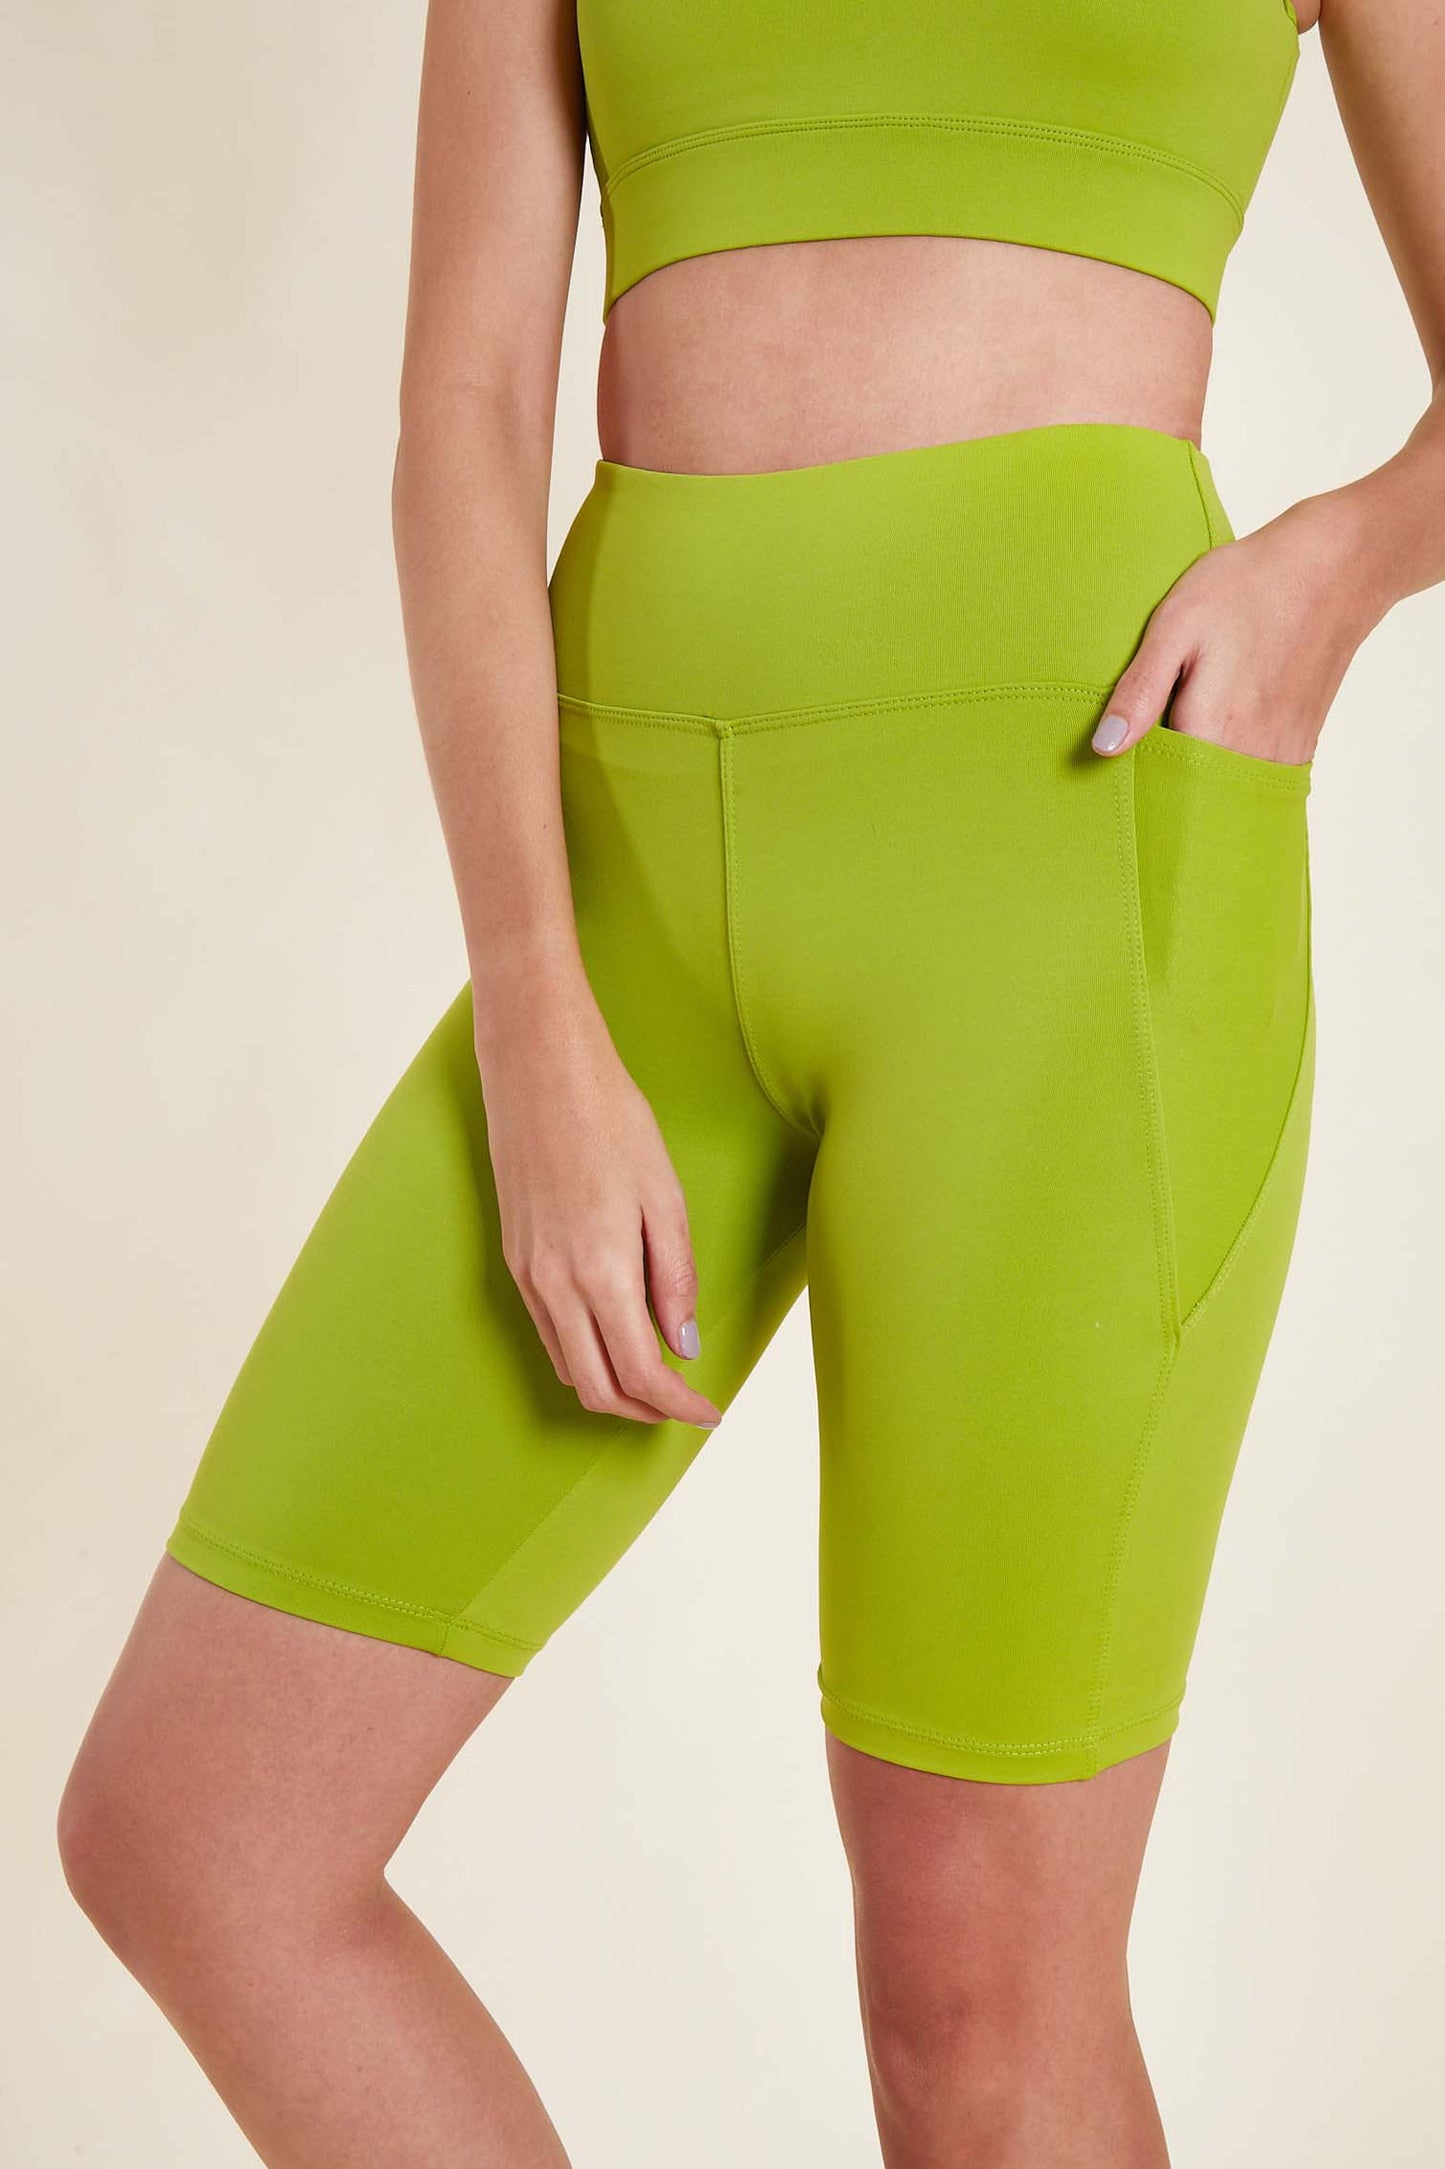 Cadlao Cycling Shorts in Lime